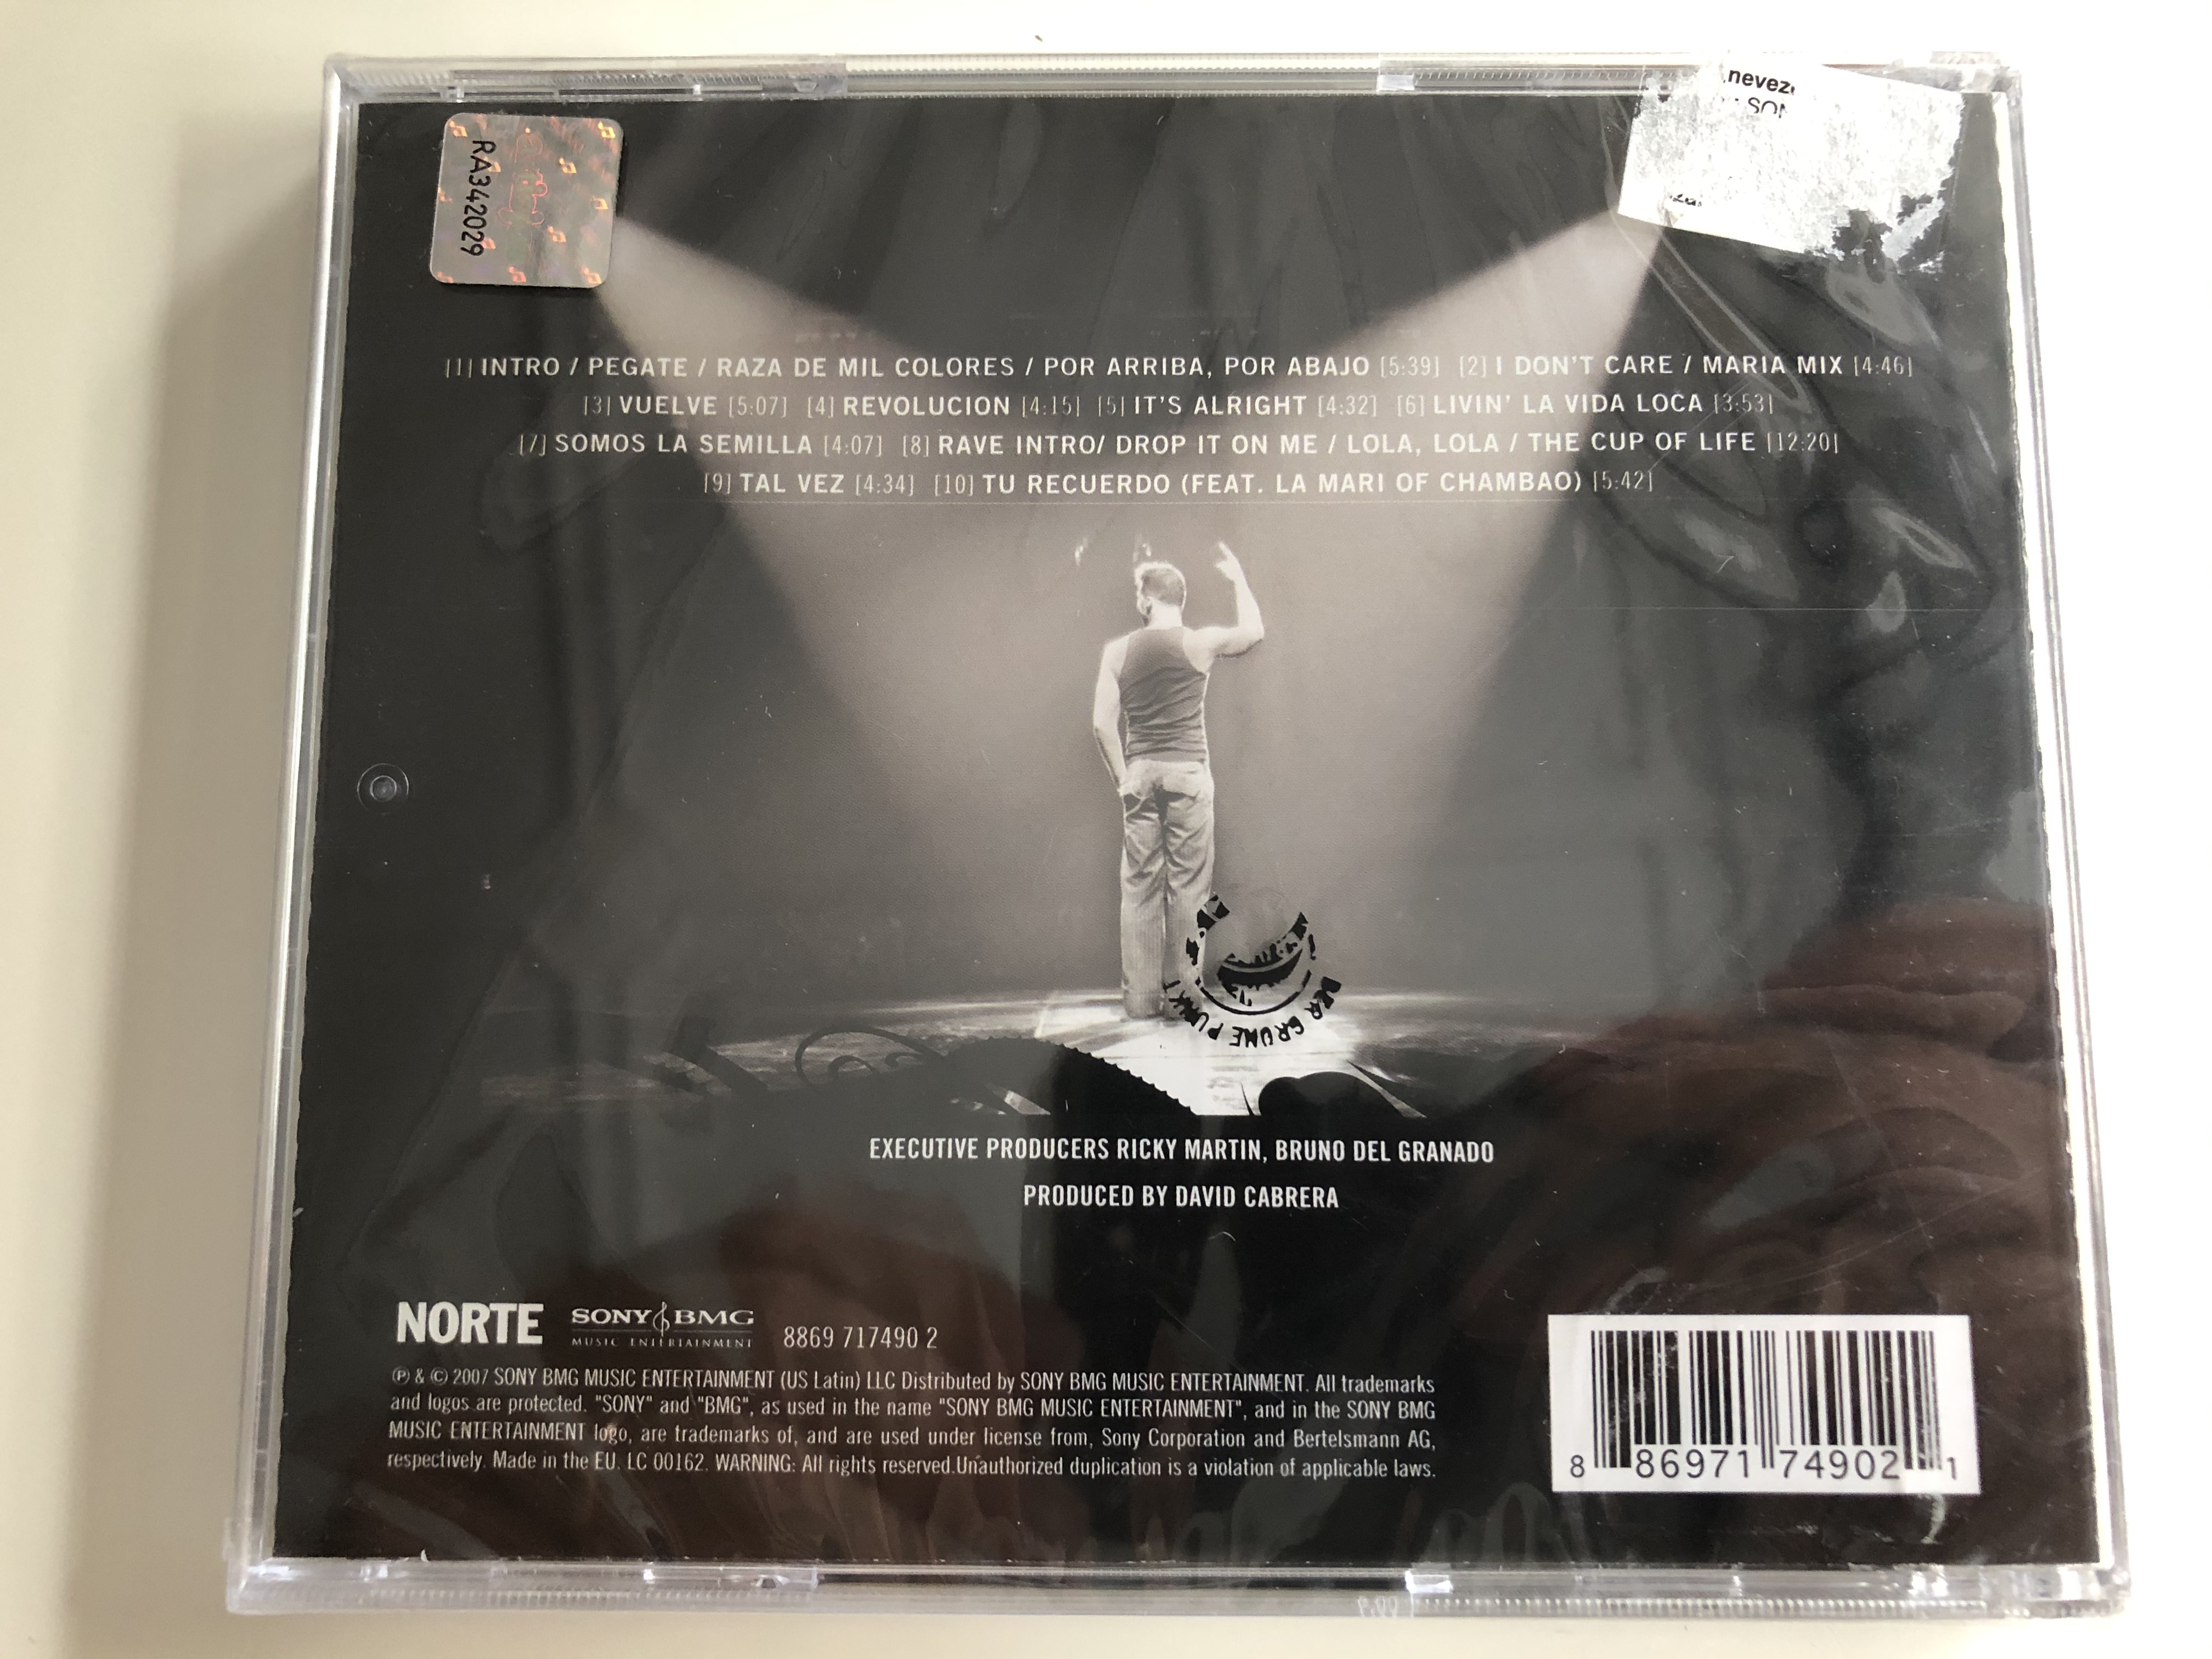 ricky-martin-live-black-and-white-tour-includes-the-smash-hits-tu-recuerdo-pegate-tal-vez-i-don-t-care-vuelve-among-others-sony-bmg-music-entertainment-audio-cd-2.jpg